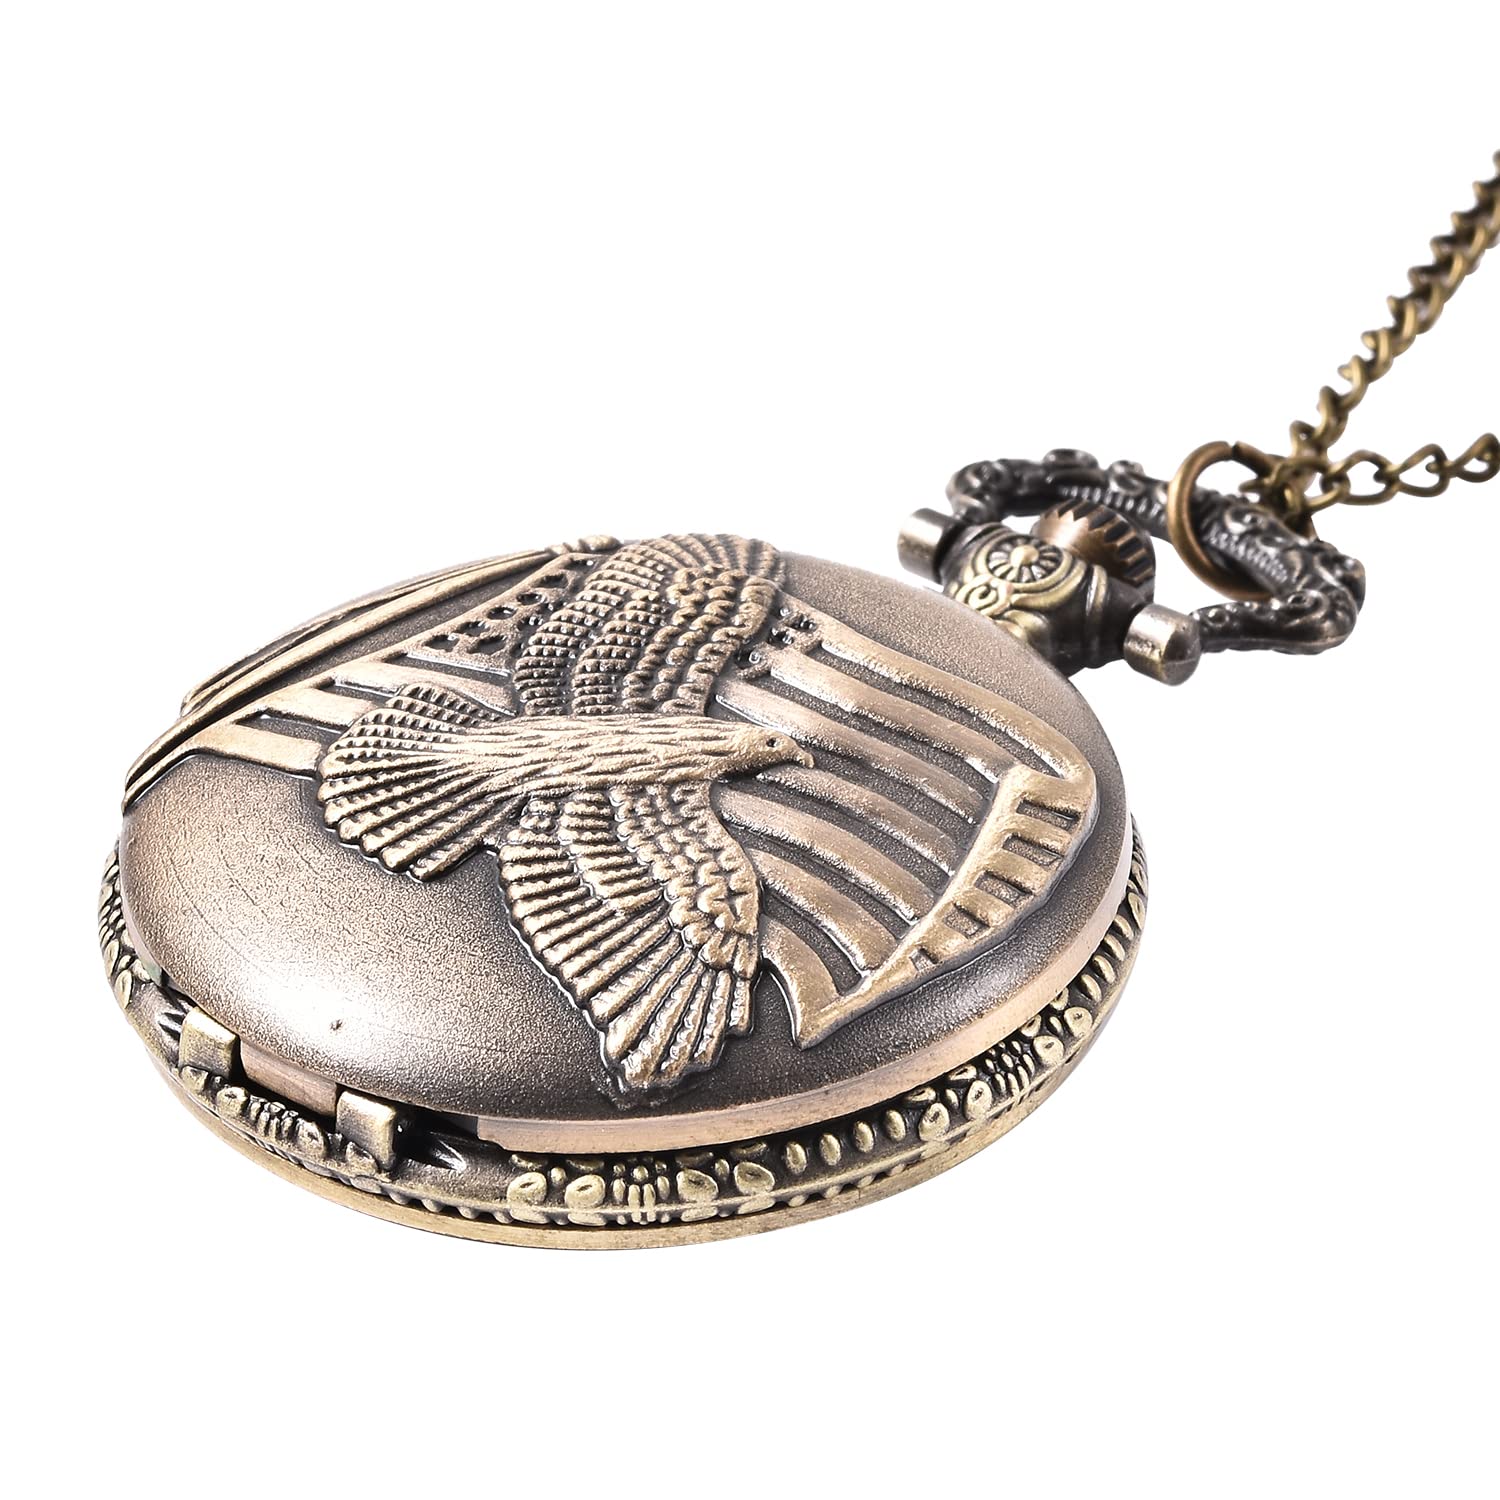 SHOP LC DELIVERING JOY Strada Japanese Movement Eagle Spread Wings Pattern Pocket Watch with Iron Chain Birthday Gifts